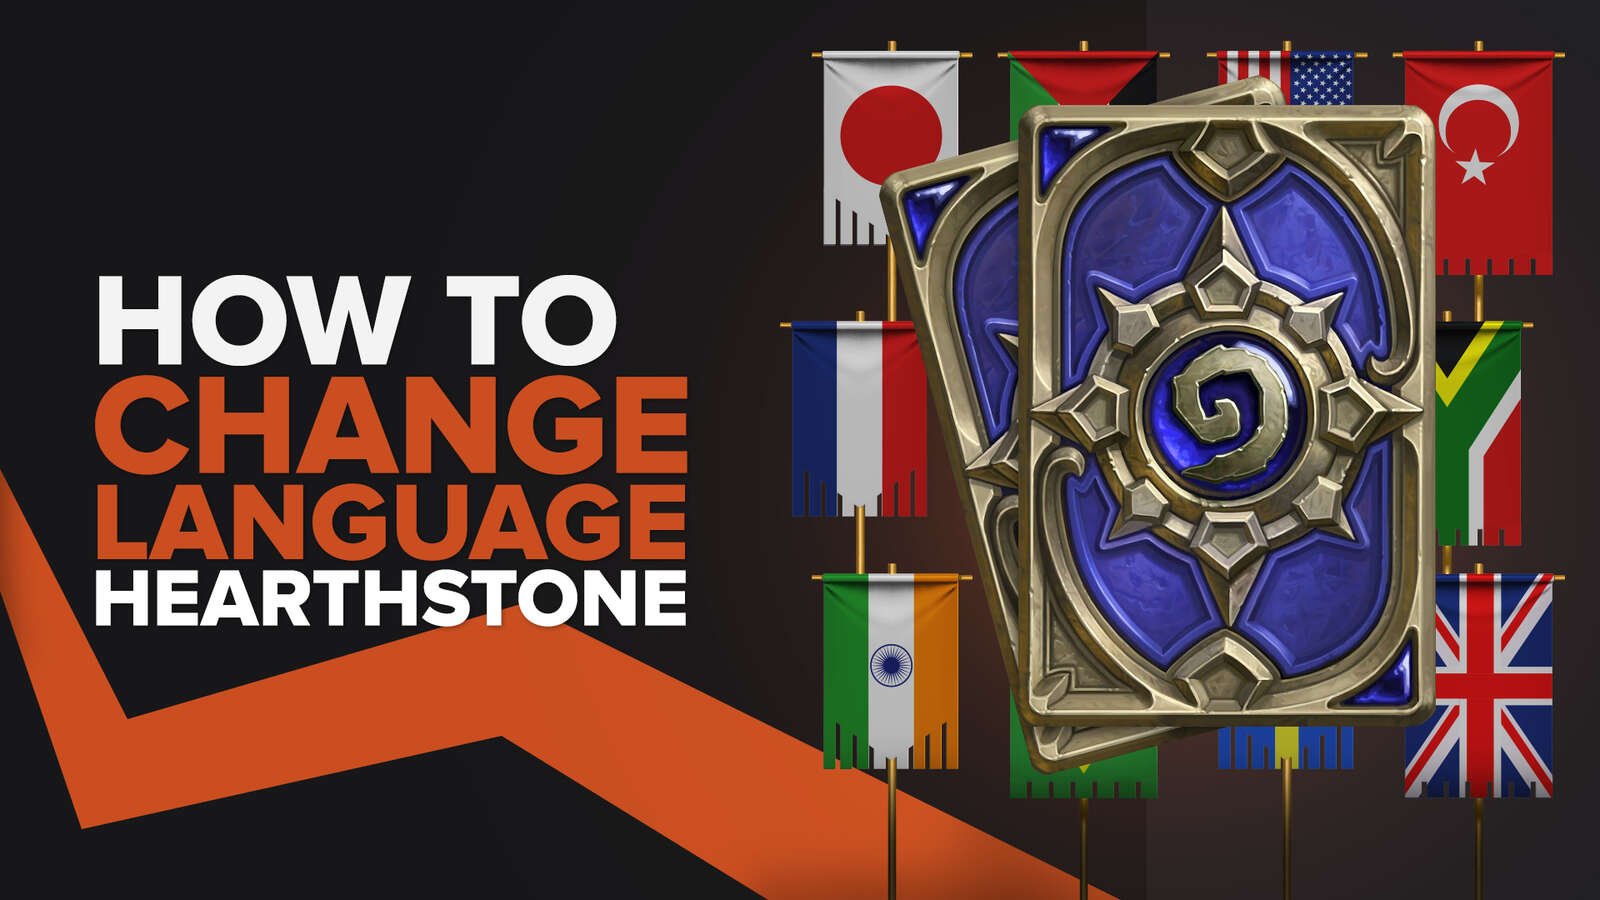 How To Change Language in Hearthstone Quickly